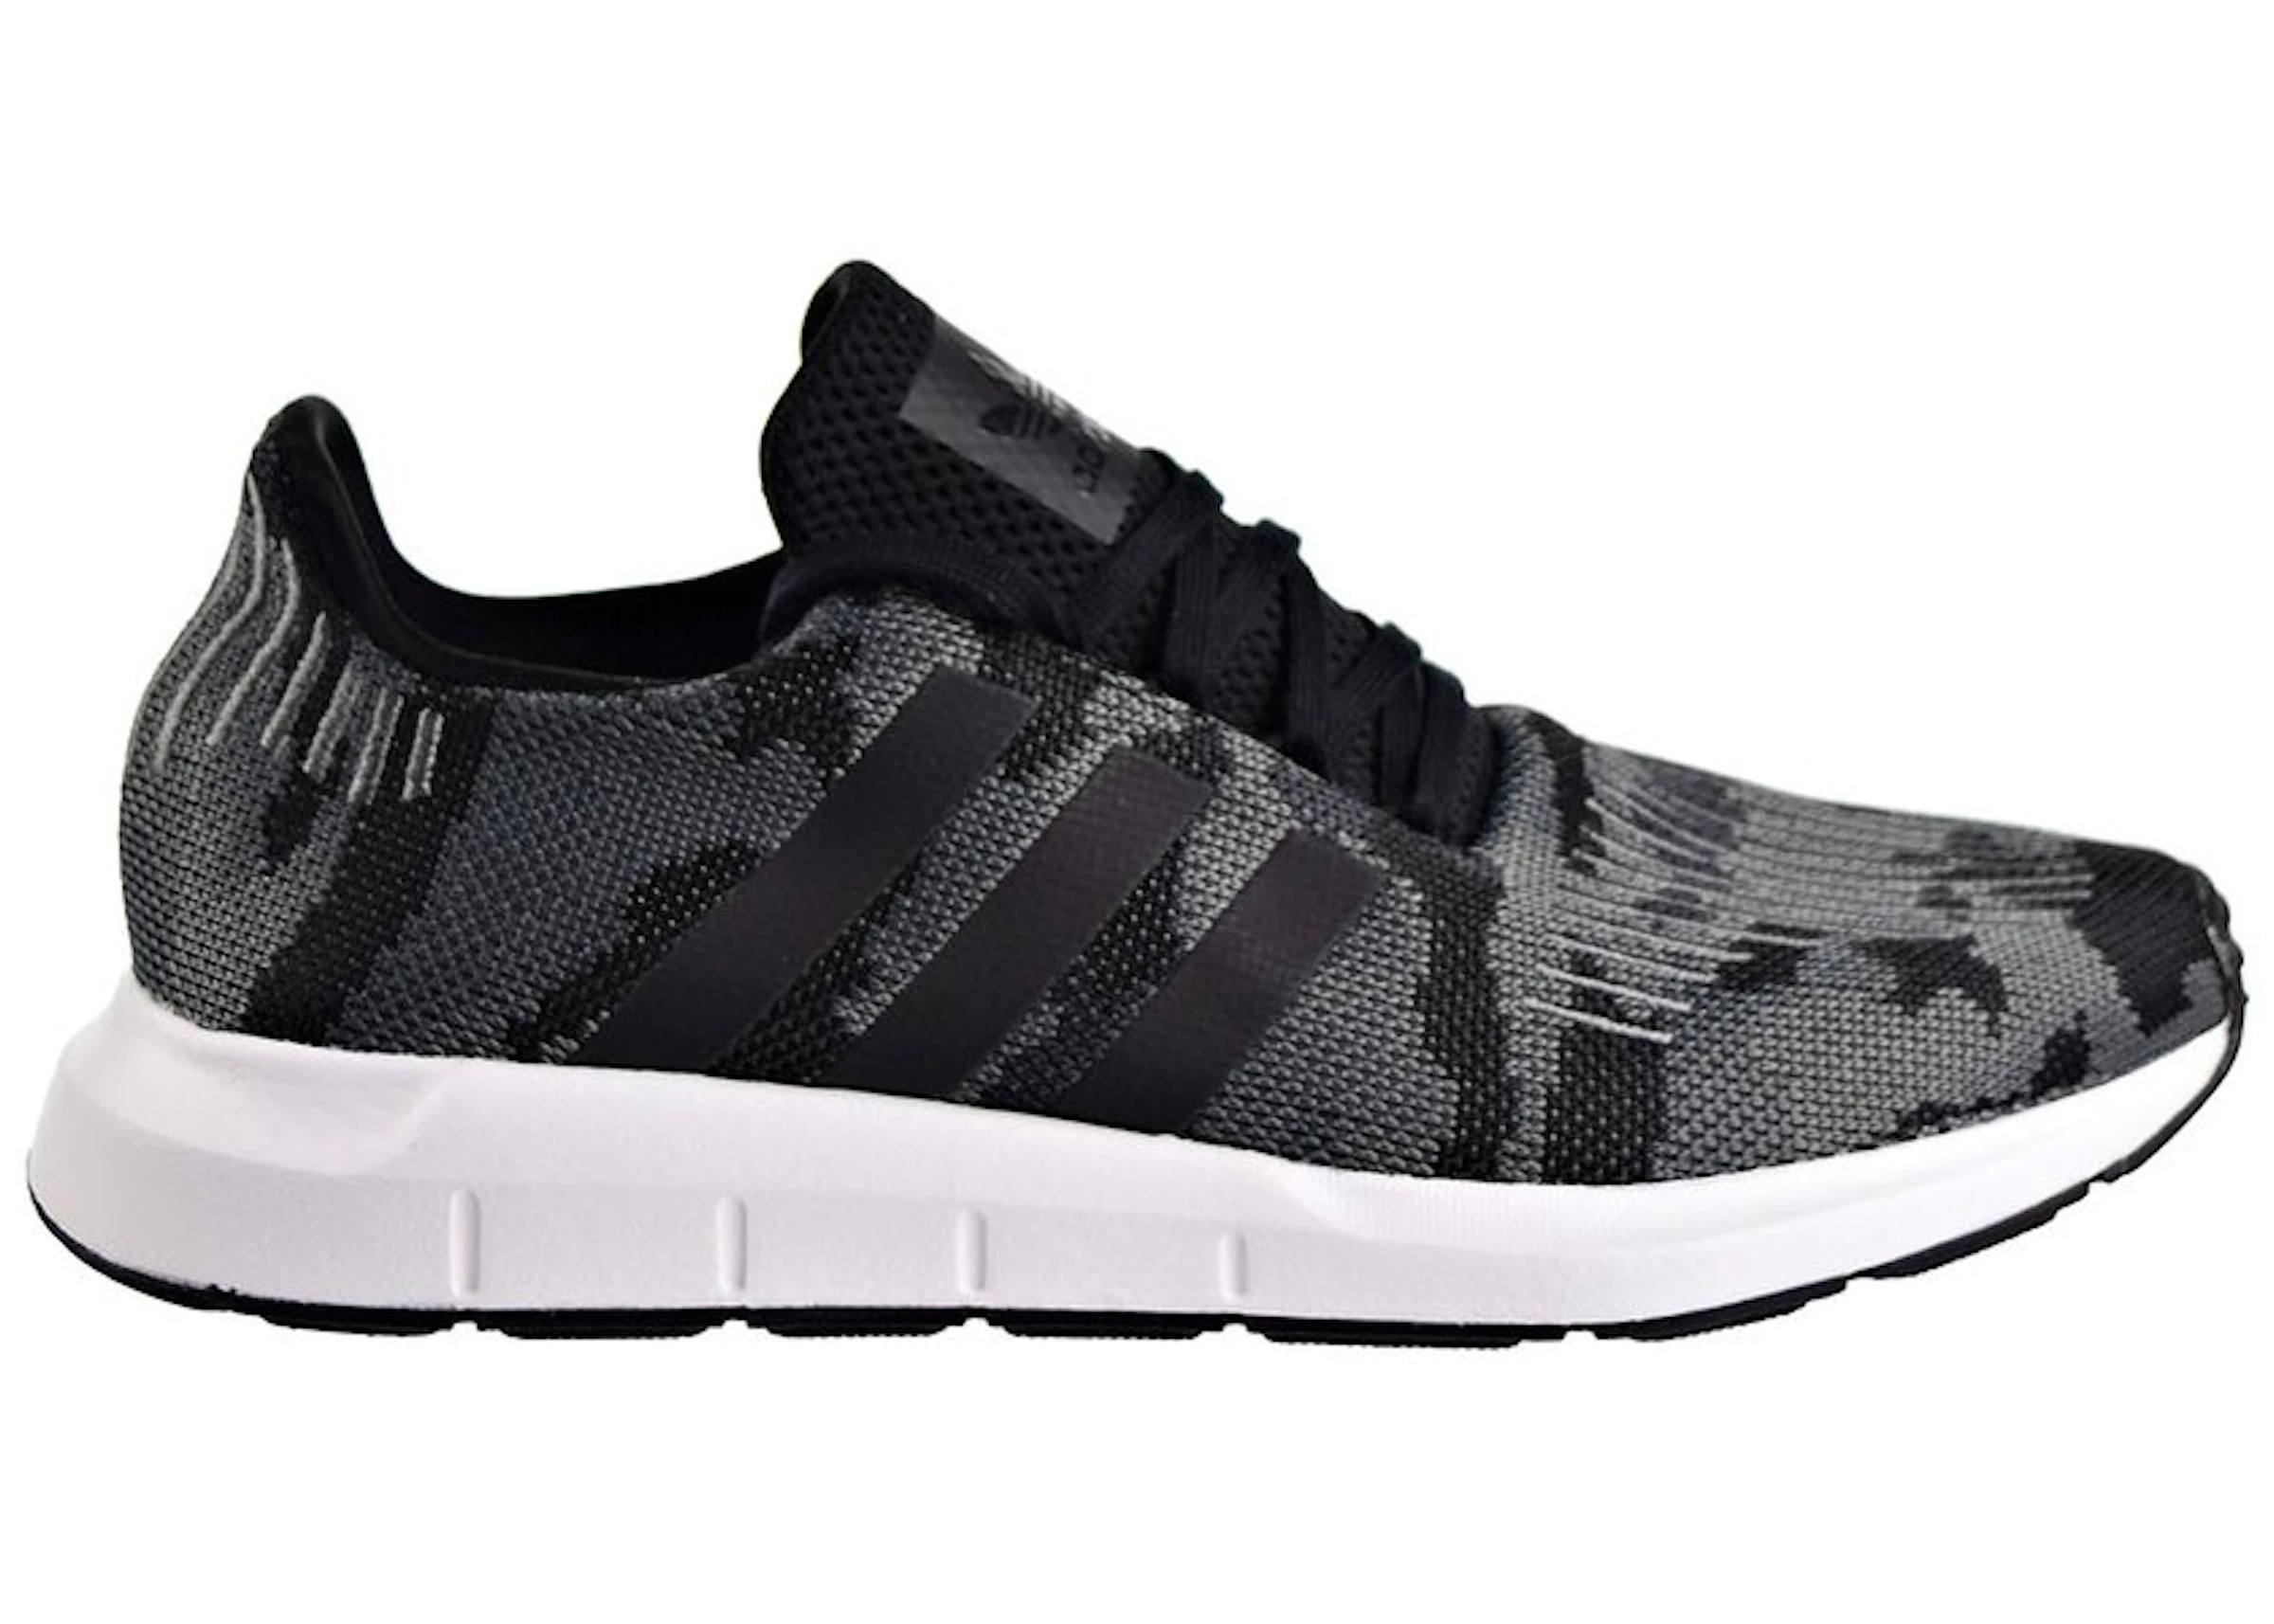 Exactly Excrement comfortable adidas Swift Run Core Black White - BD7977 - US